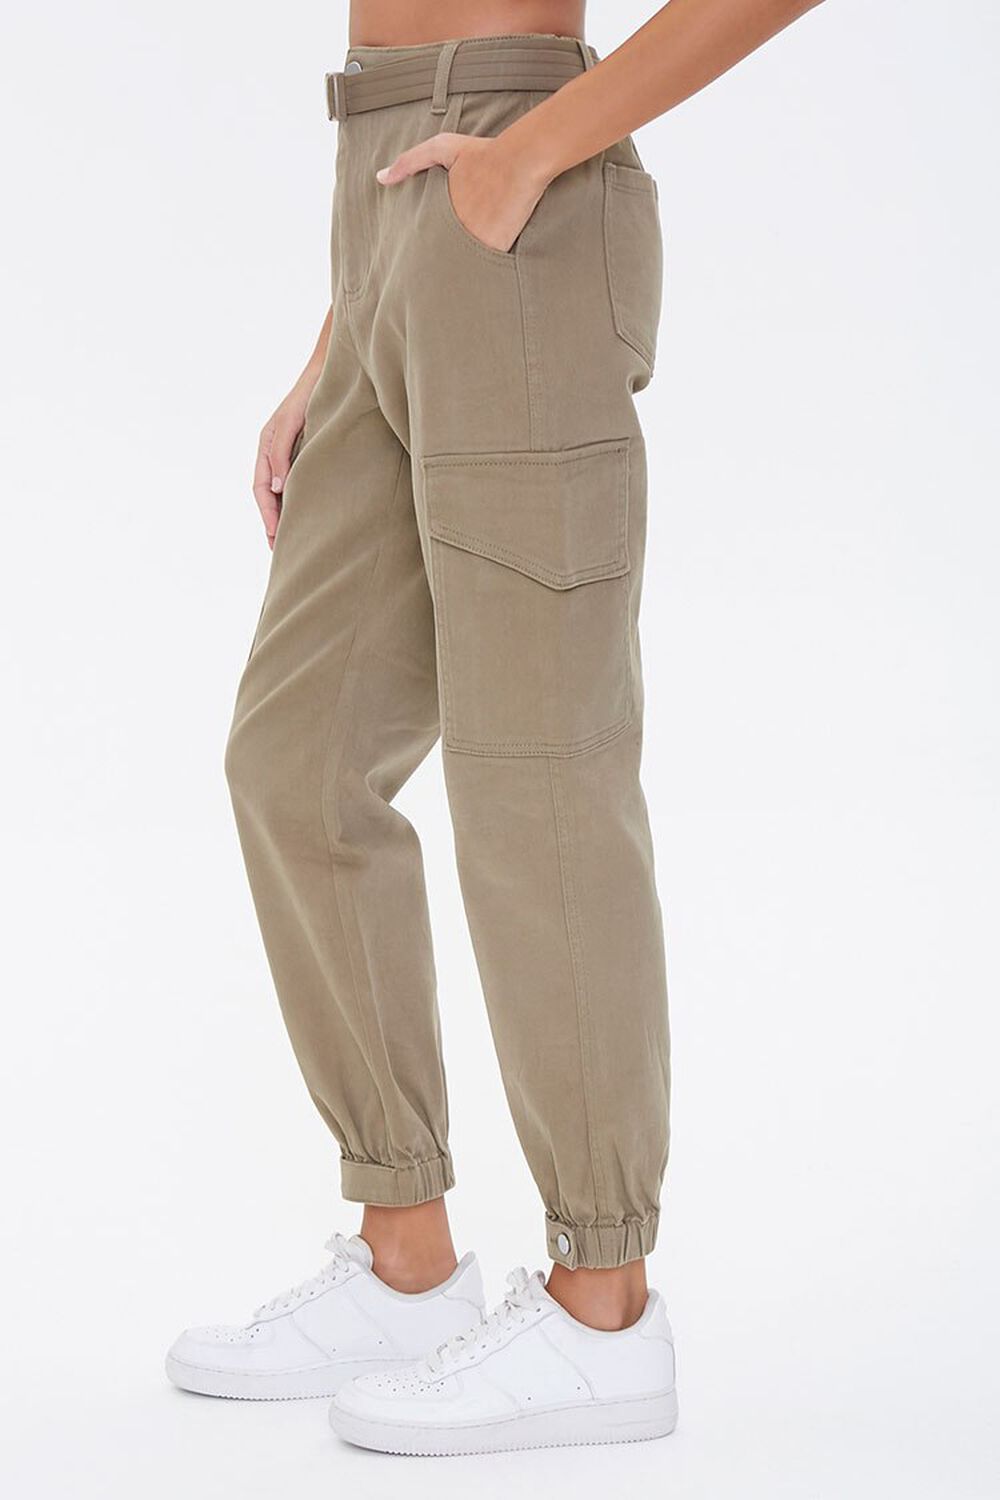 OLIVE Belted Cargo Ankle Pants, image 3